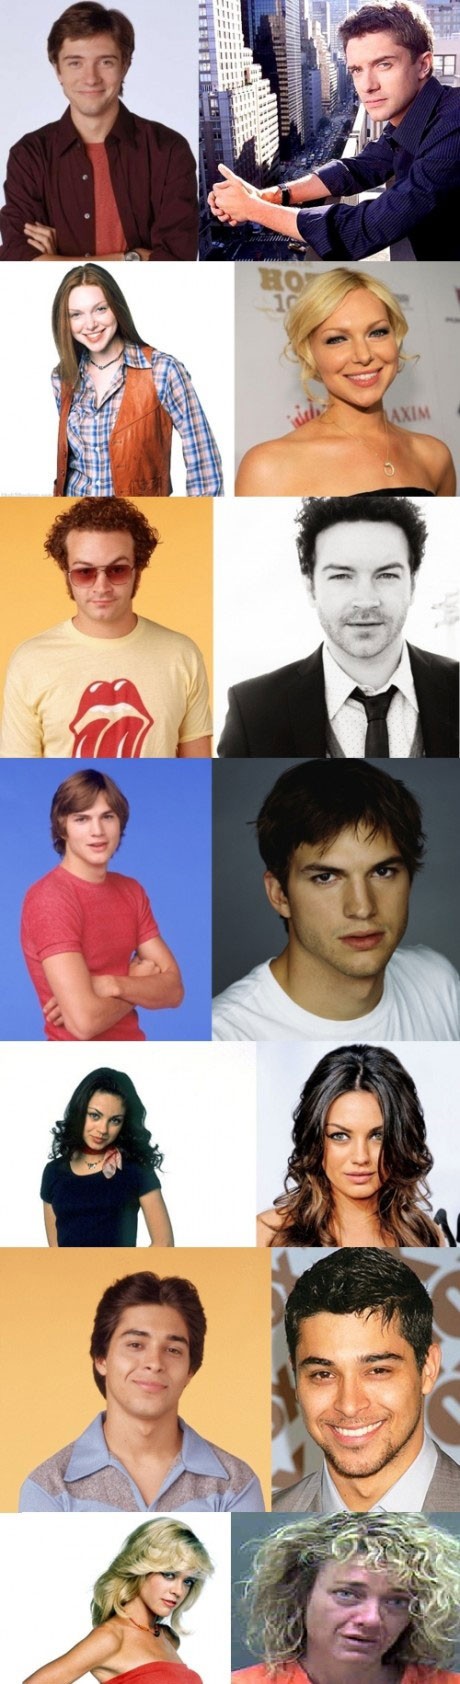 70s show cast then and now - Axim